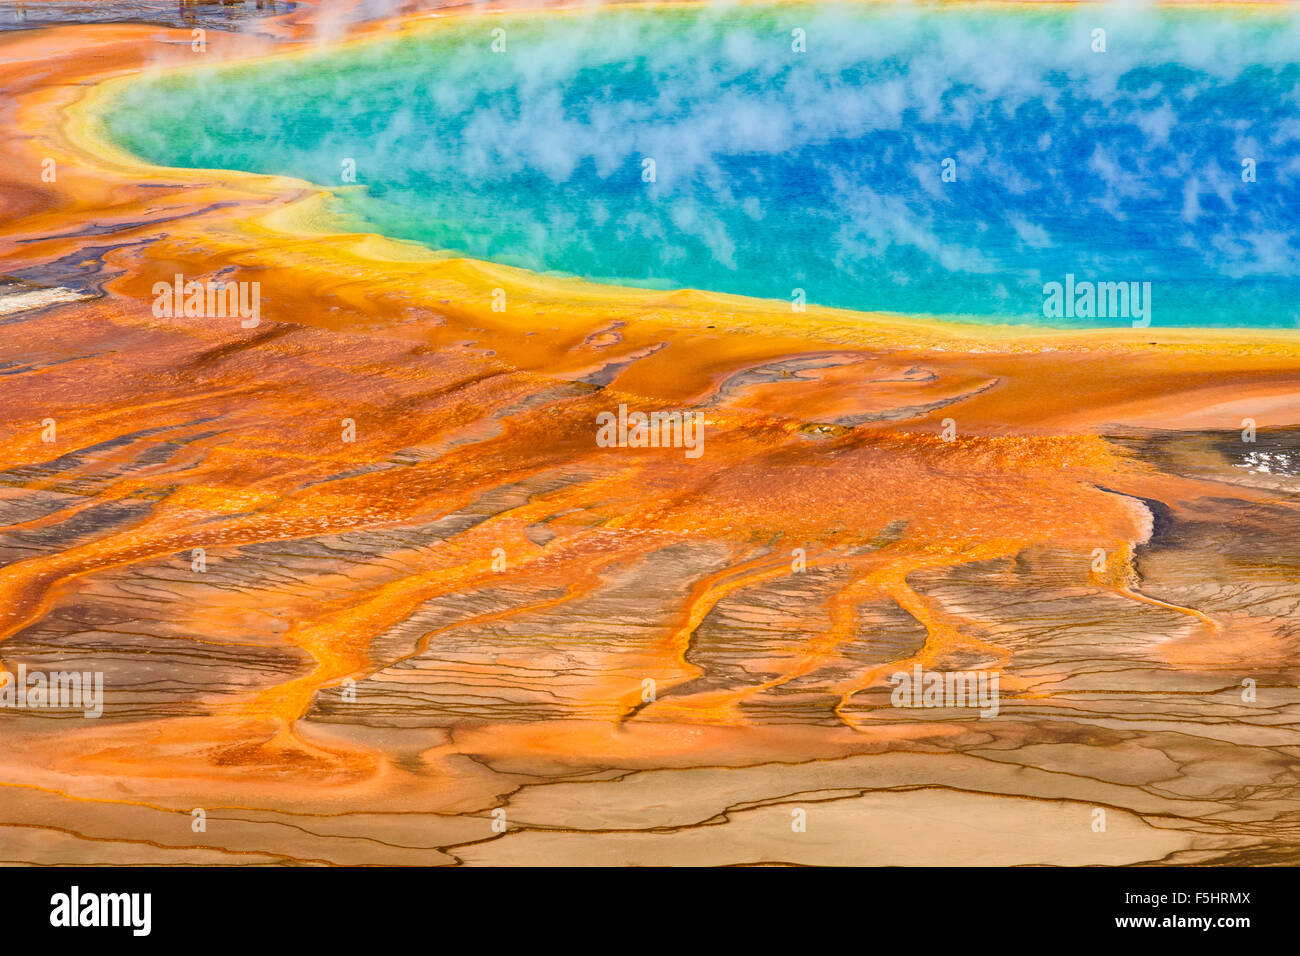 Grand Prismatic Spring, Midway Geyser Basin, il Parco Nazionale di Yellowstone, Wyoming USA Foto Stock